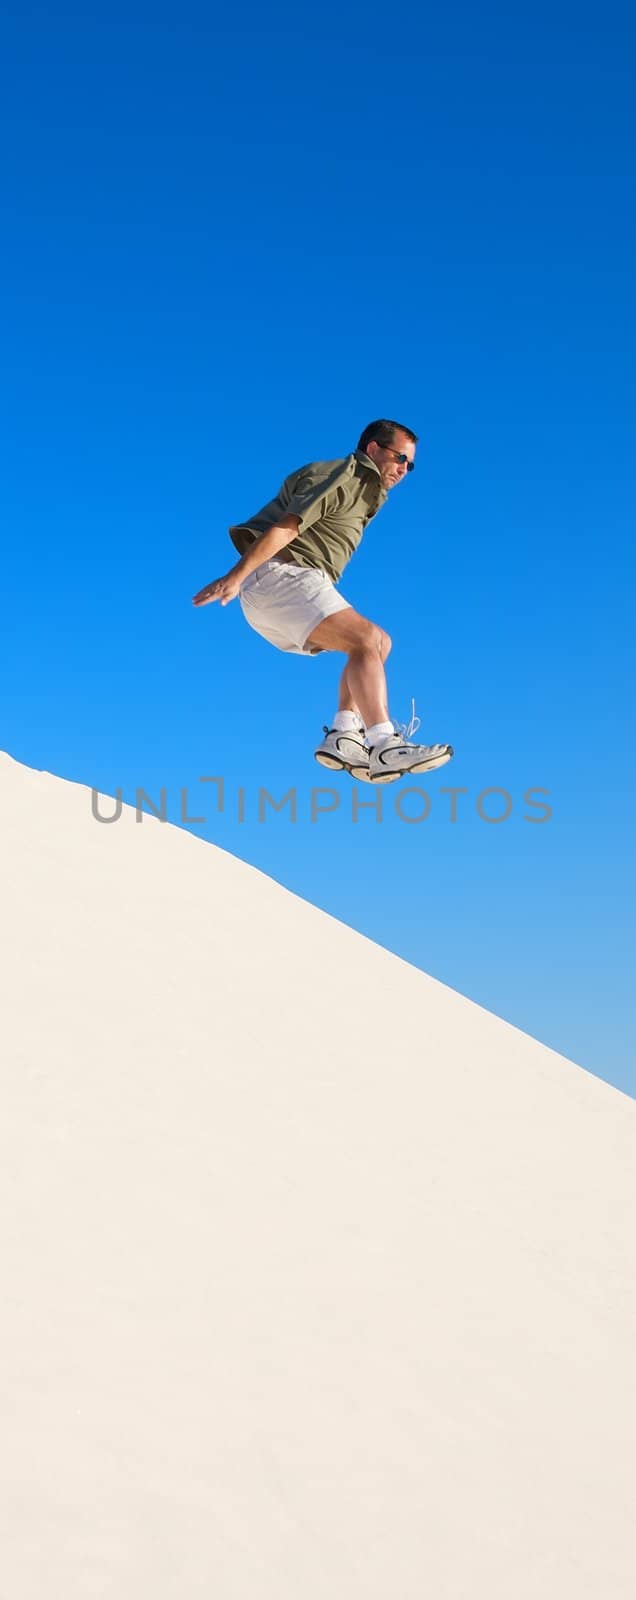 Man jumping off of sand dunes by Deimages